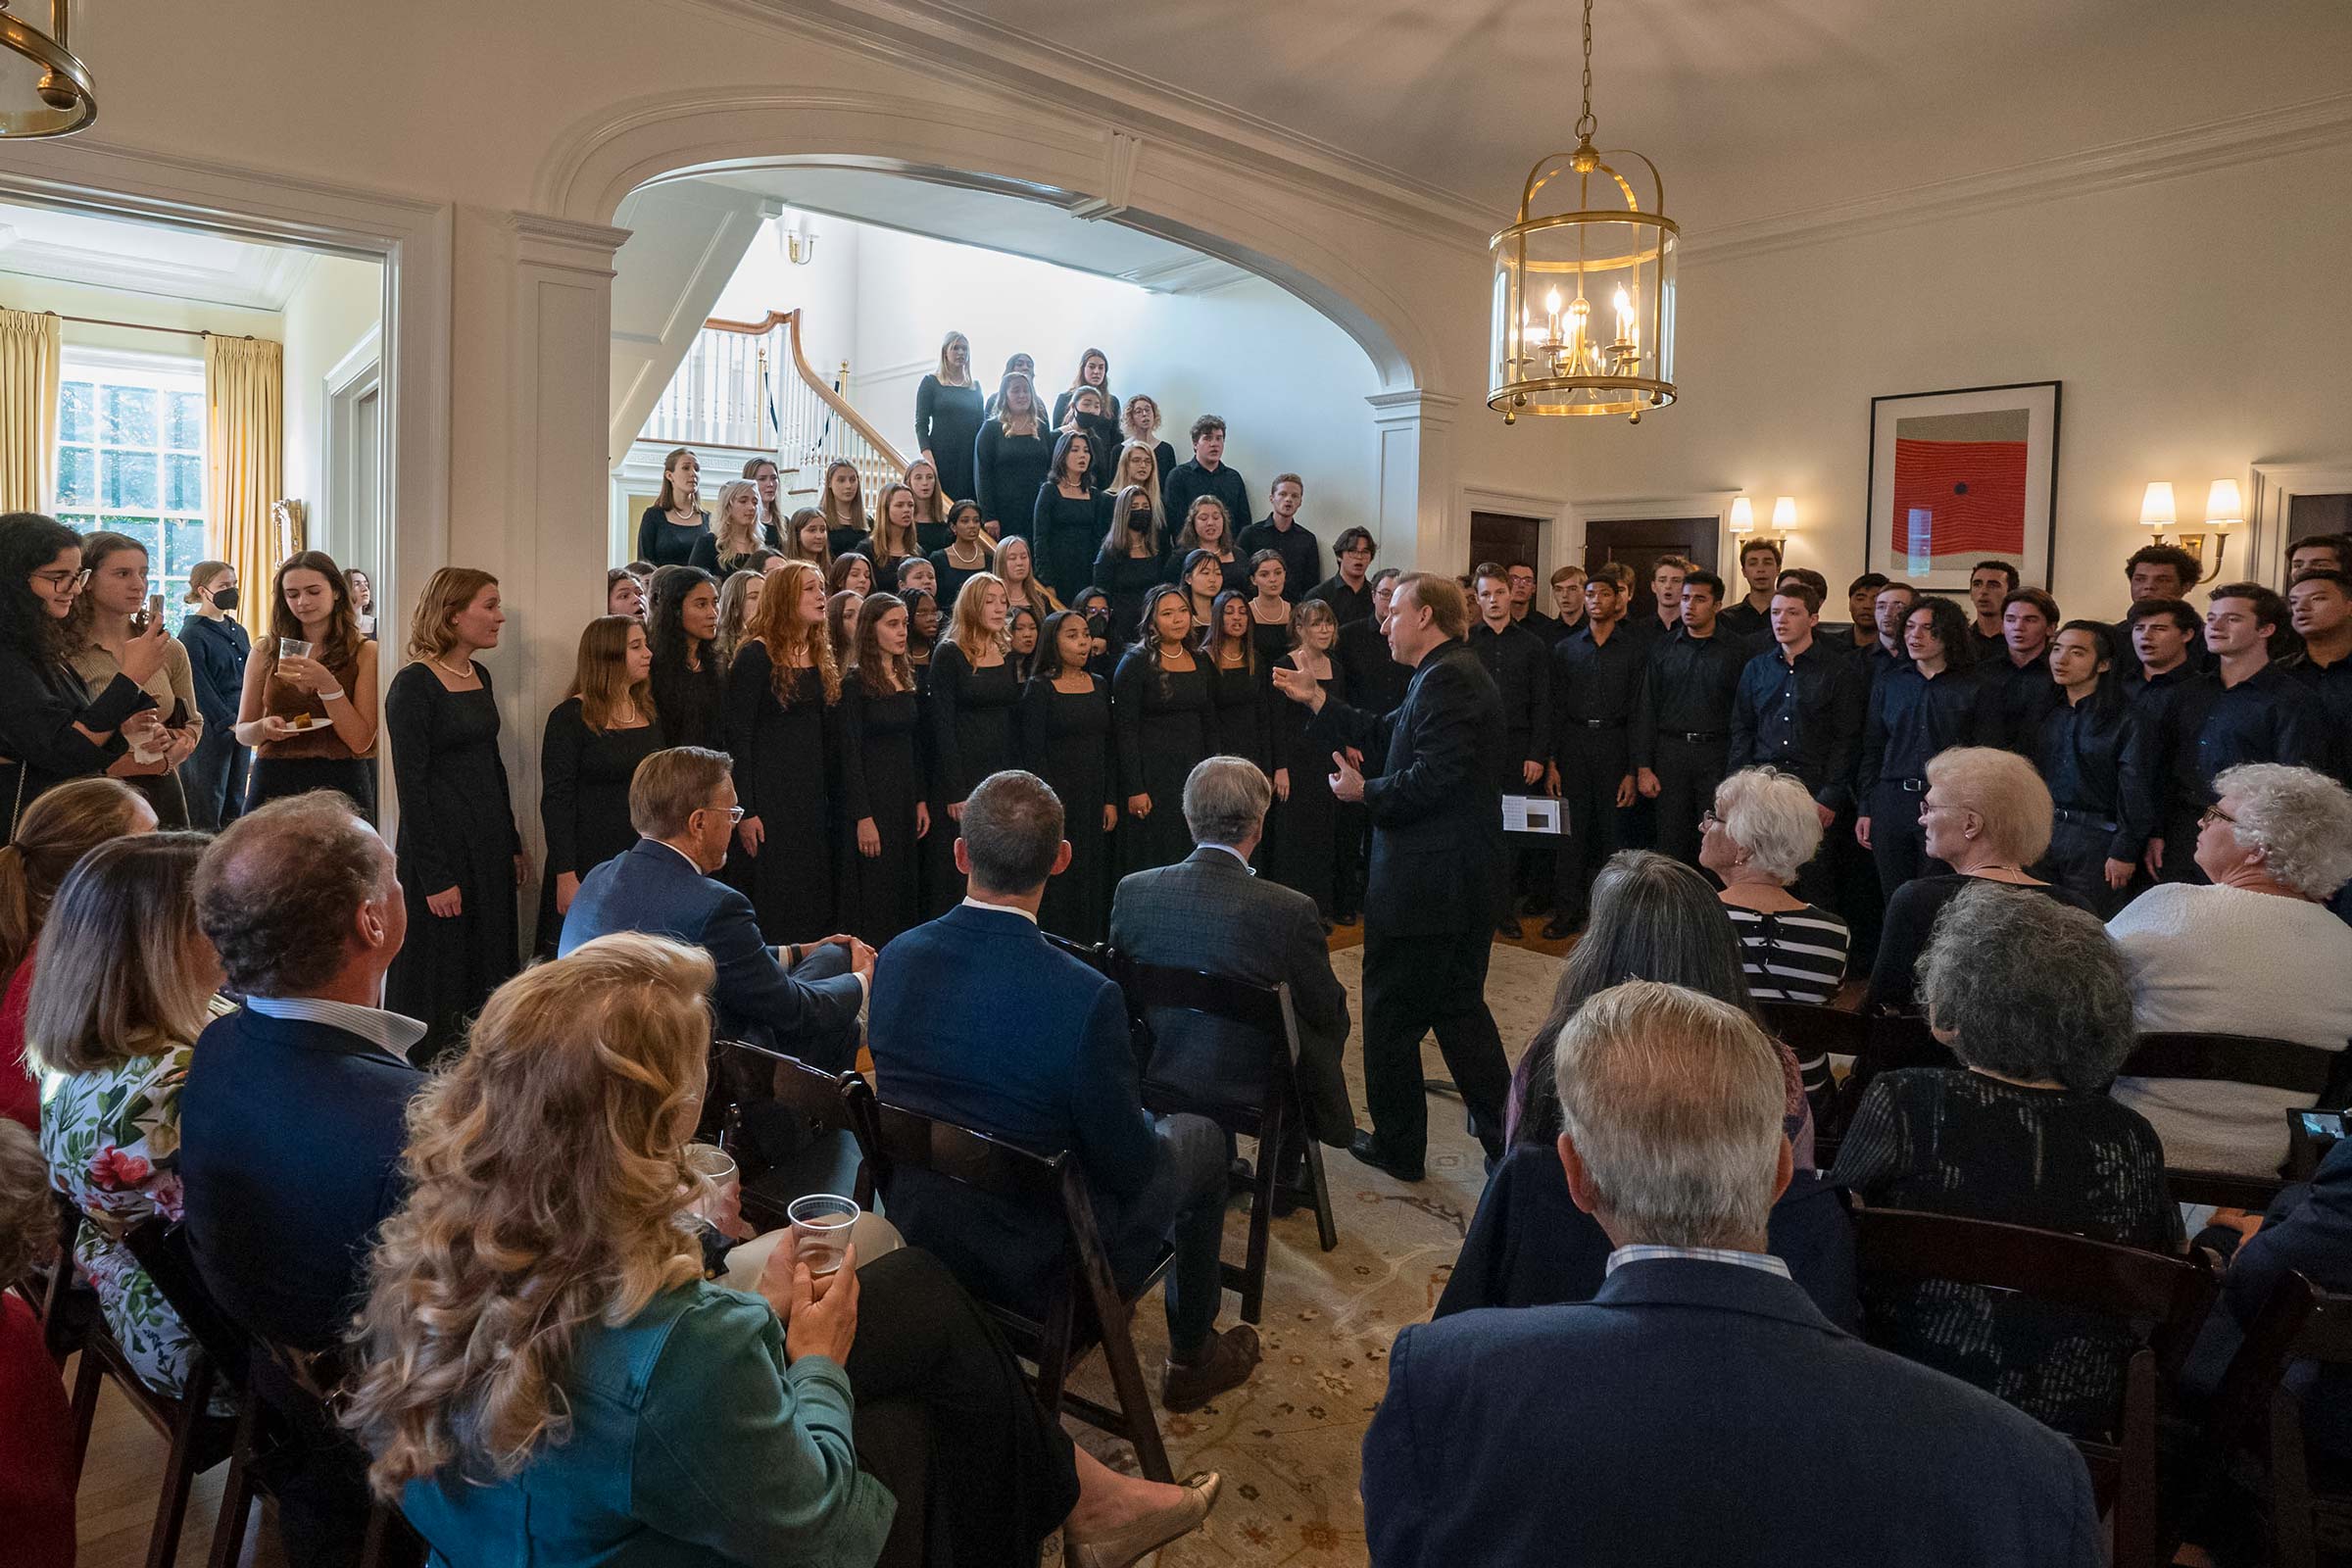 A large choir dressed in black fills a stairwell and back of a room singing for a small seated audience